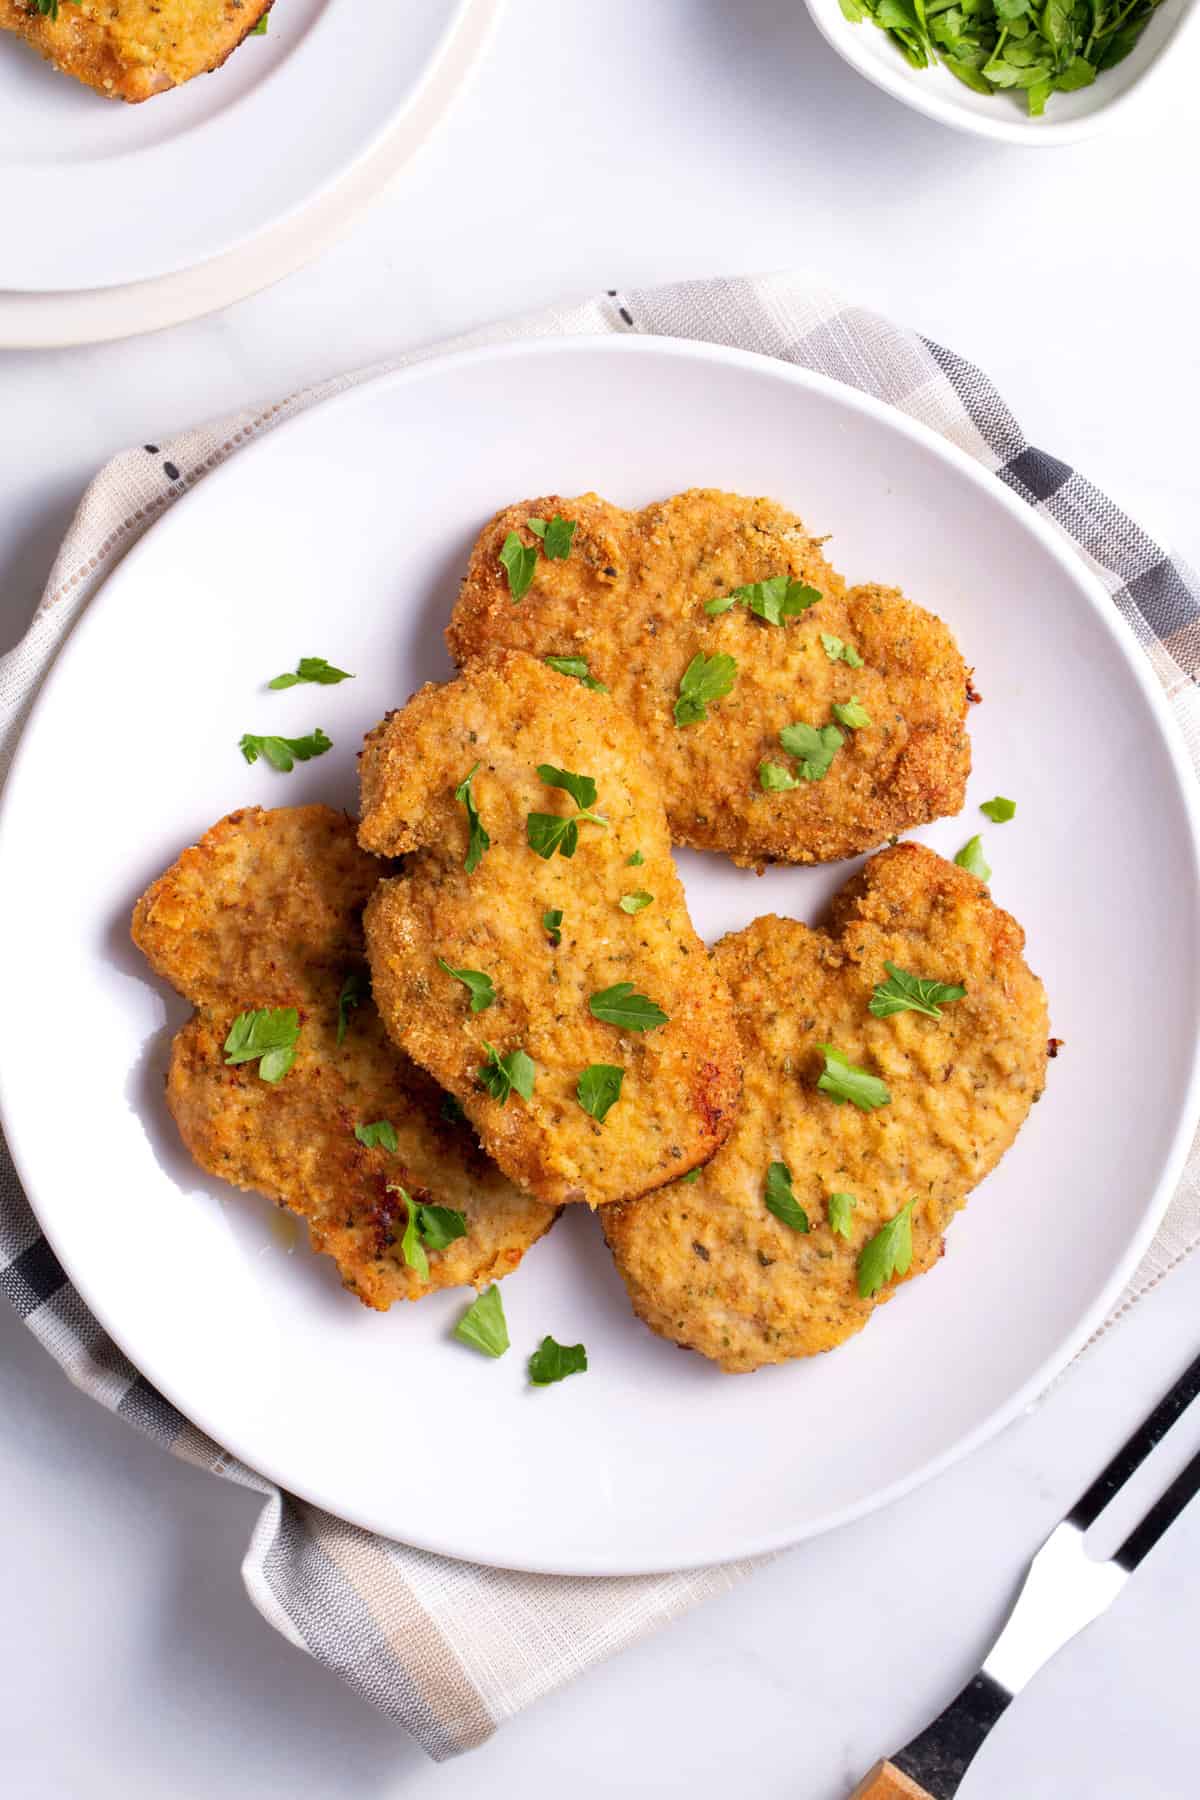 top down image of a plate of baked breaded pork chops served on a white round plate garnished with fresh parsley